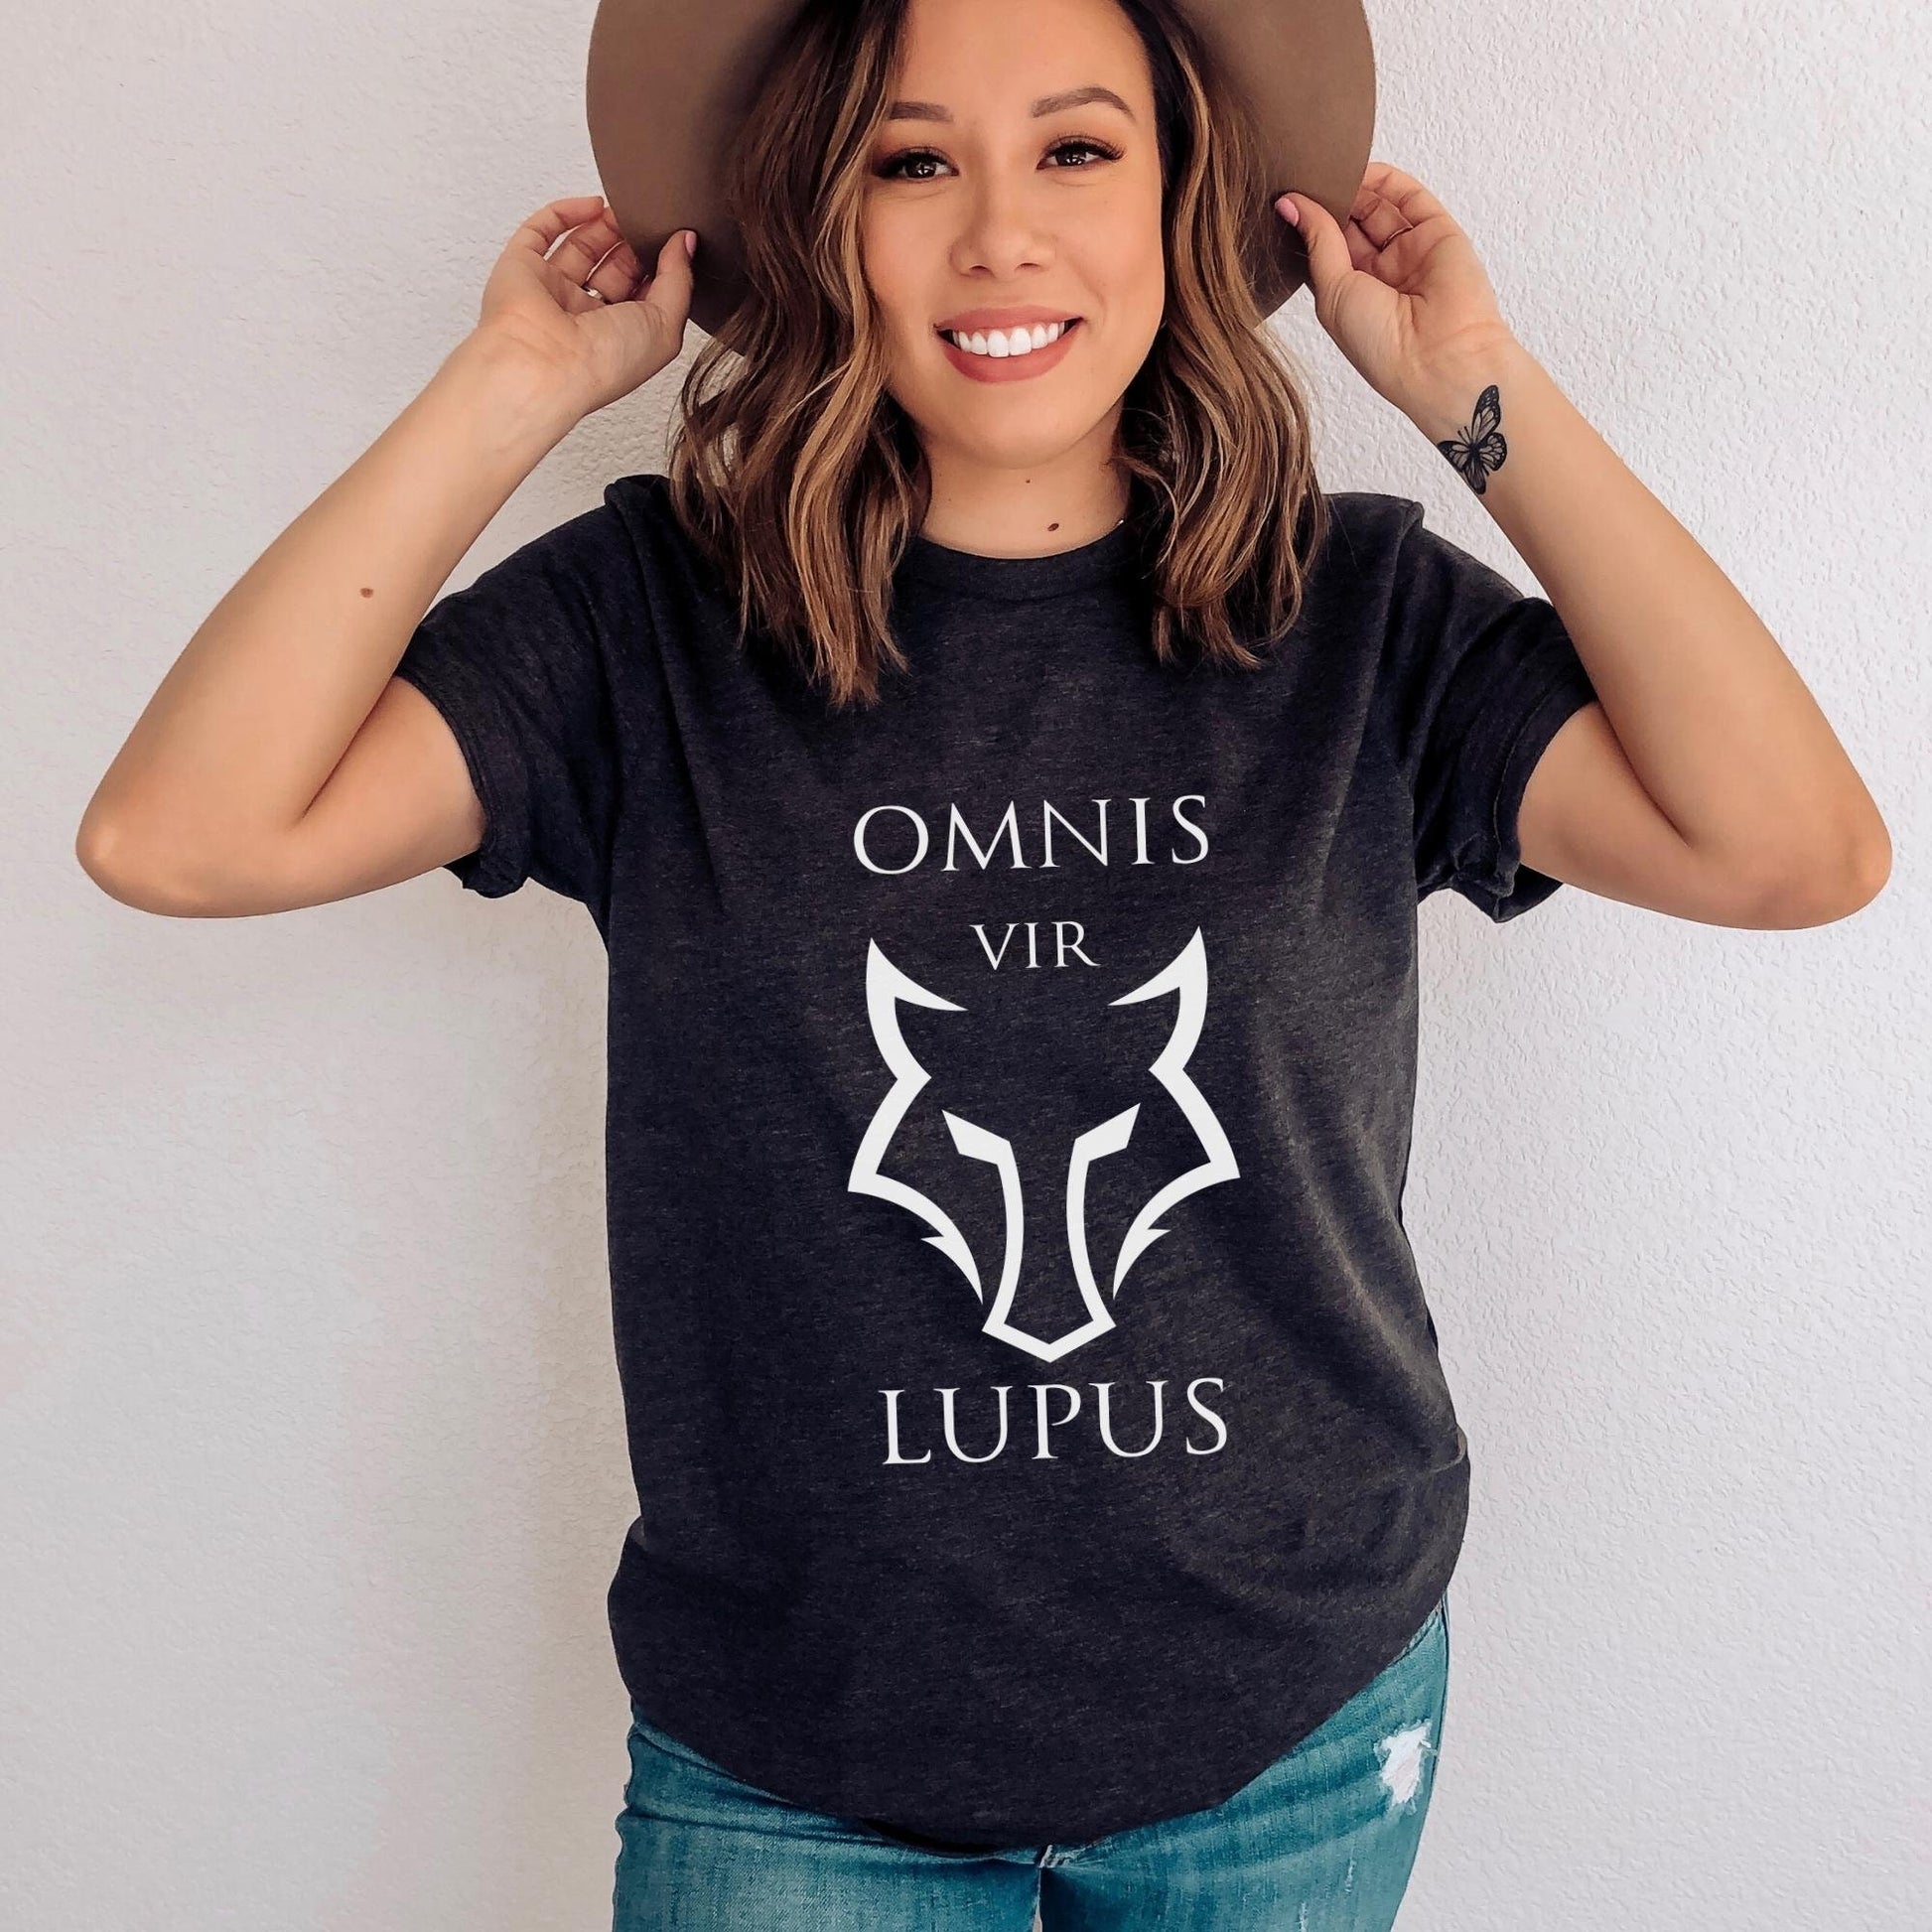 Red Rising Omnis vir Lupus T-Shirt | Pierce Brown Bookish Gift - Ink and Stories